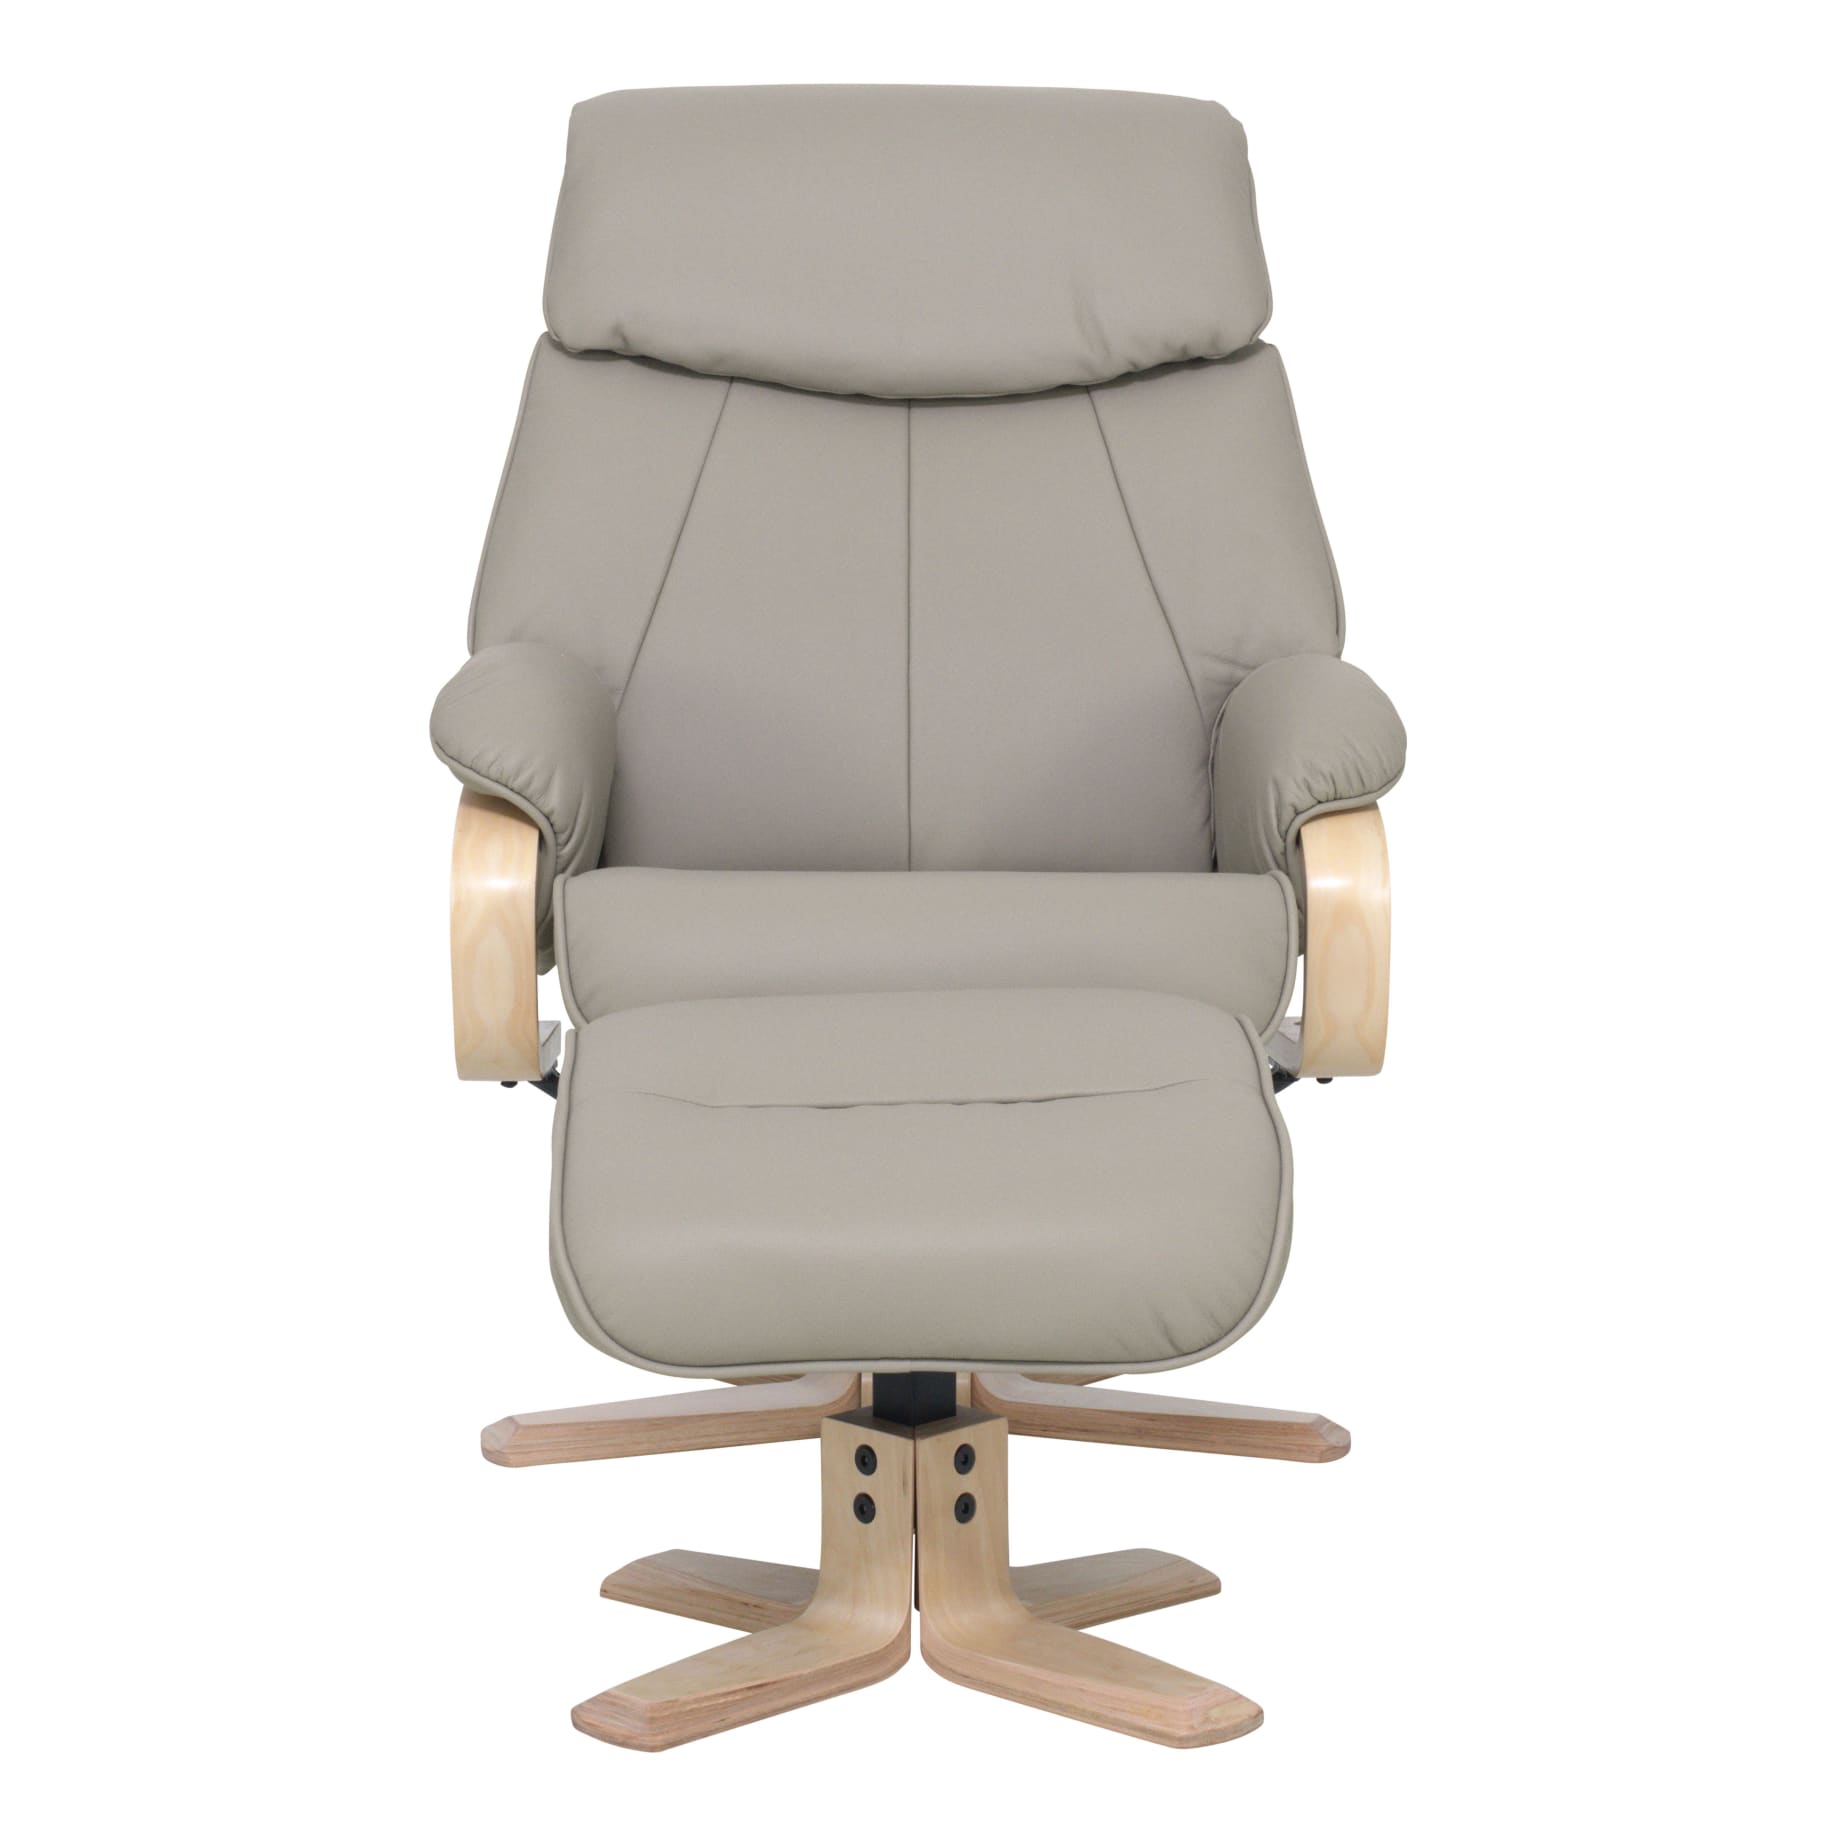 Turner Recliner + Ottoman in Almond/ Natural